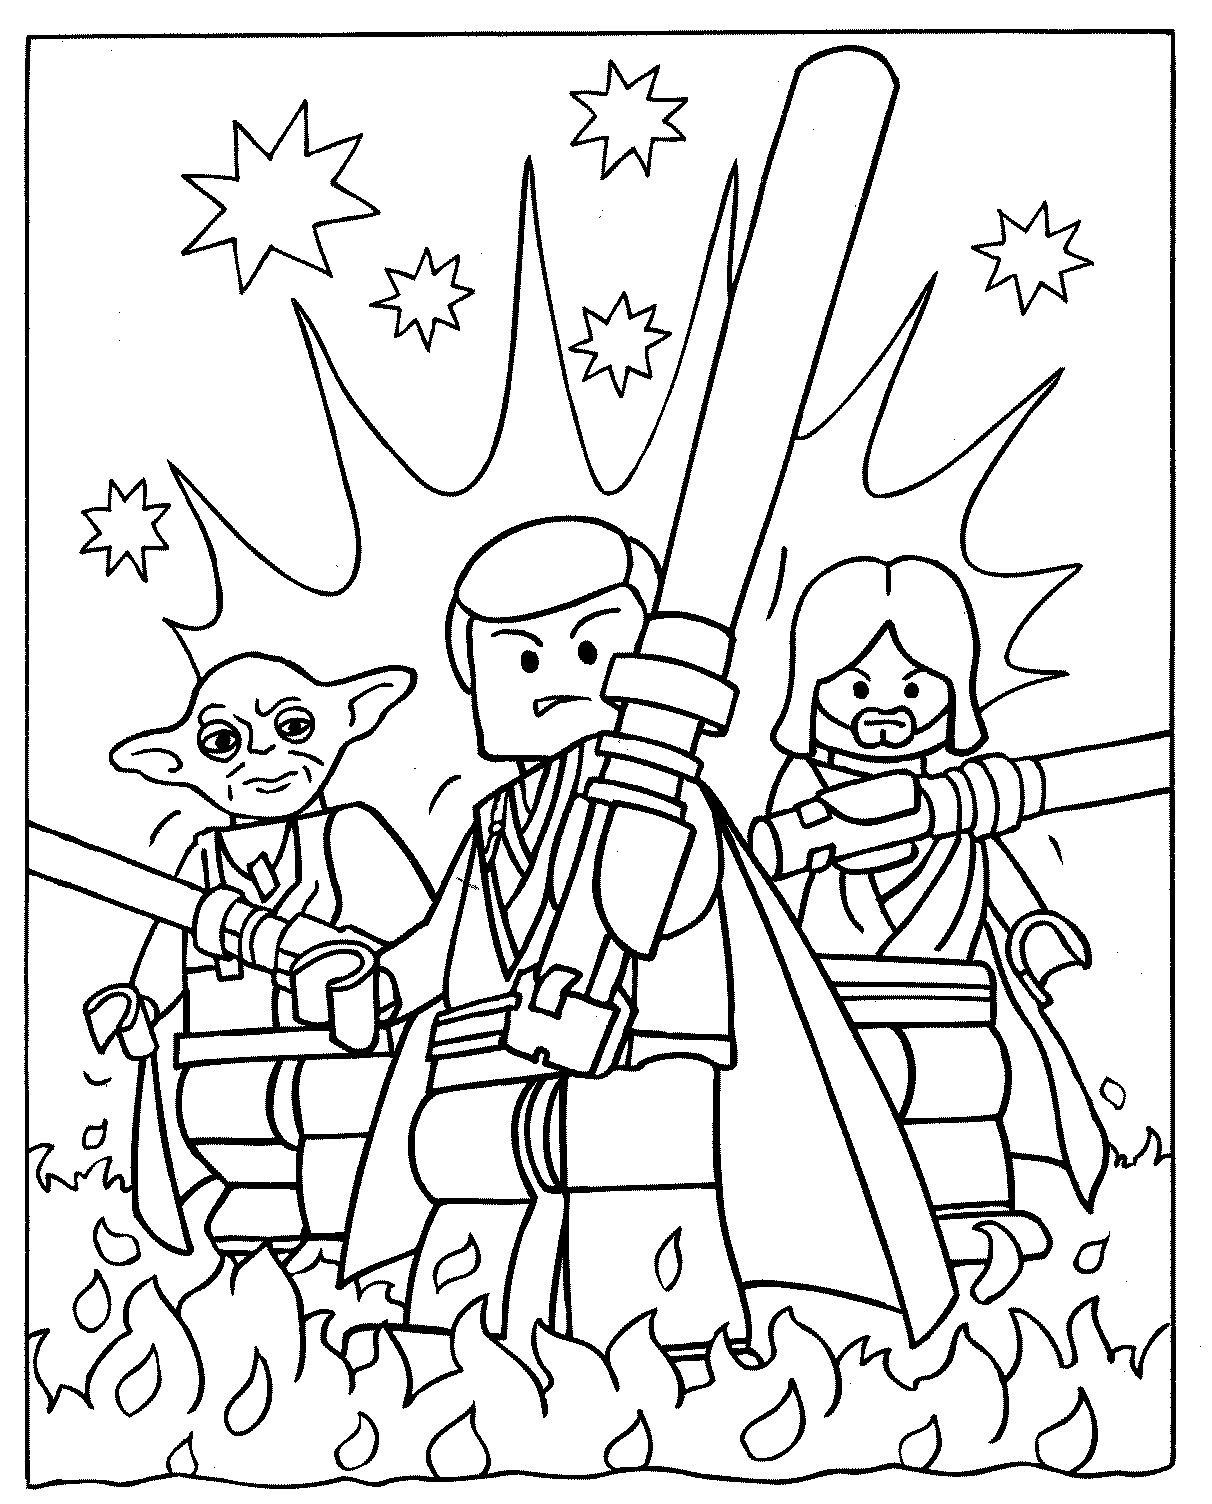 Coloring Sheets For Boys Lego
 Lego Star Wars coloring pages